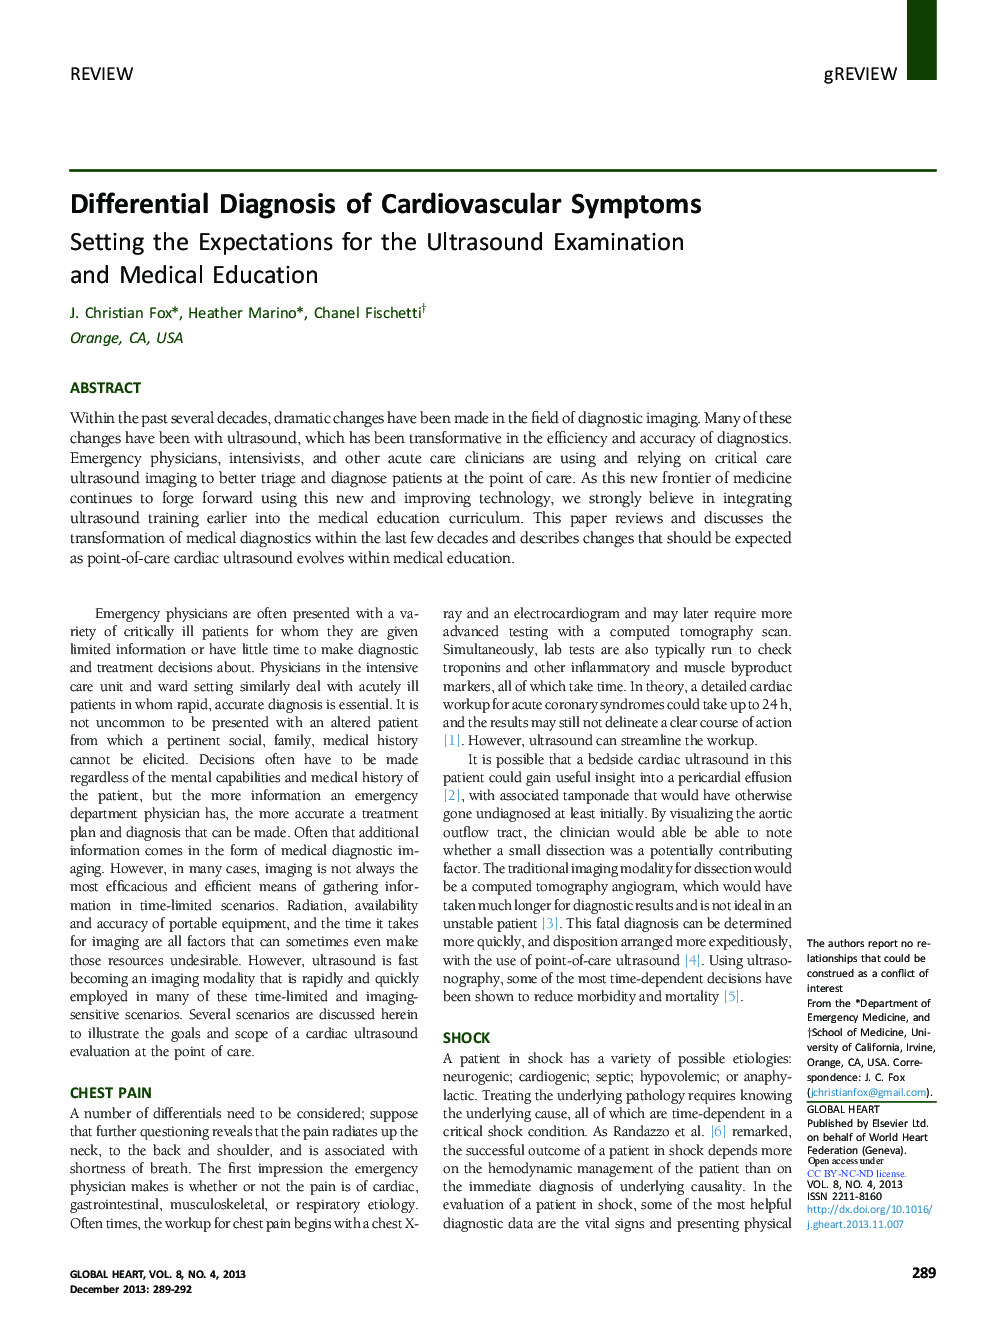 Differential Diagnosis of Cardiovascular Symptoms: Setting the Expectations for the Ultrasound Examination and Medical Education